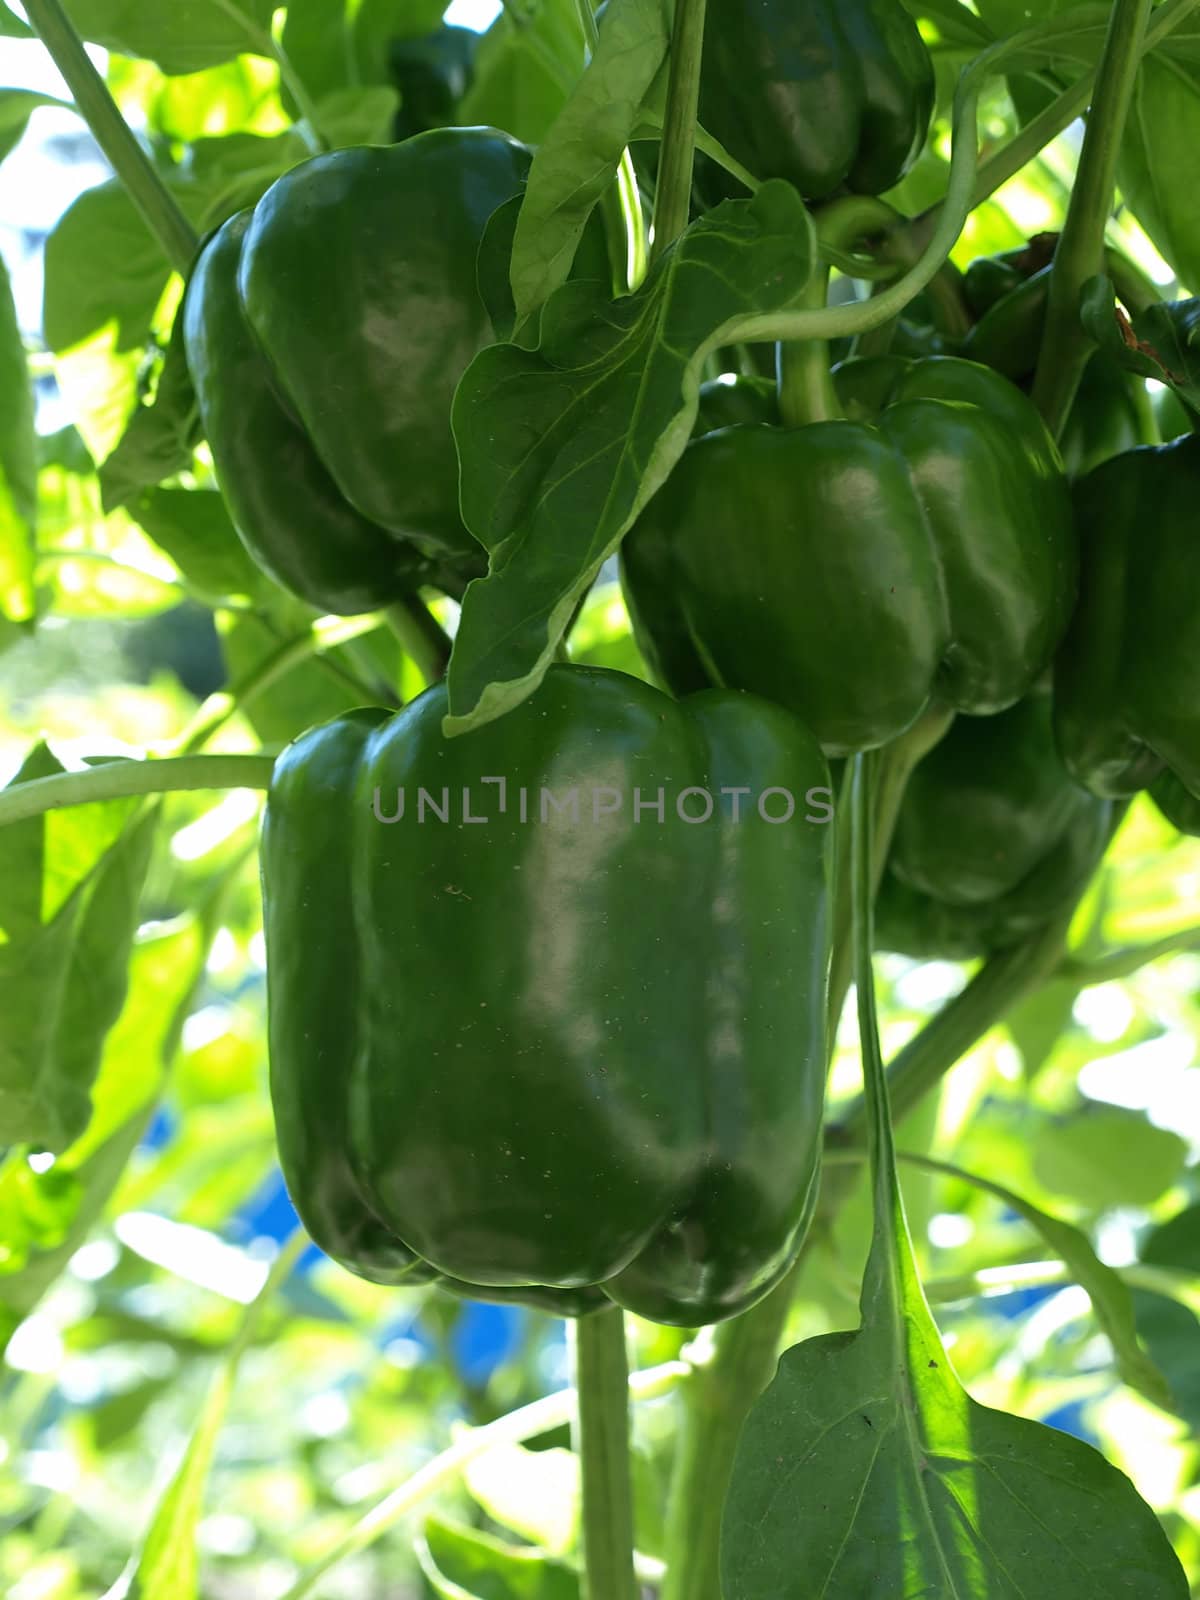 Growing Bell Peppers by RGebbiePhoto